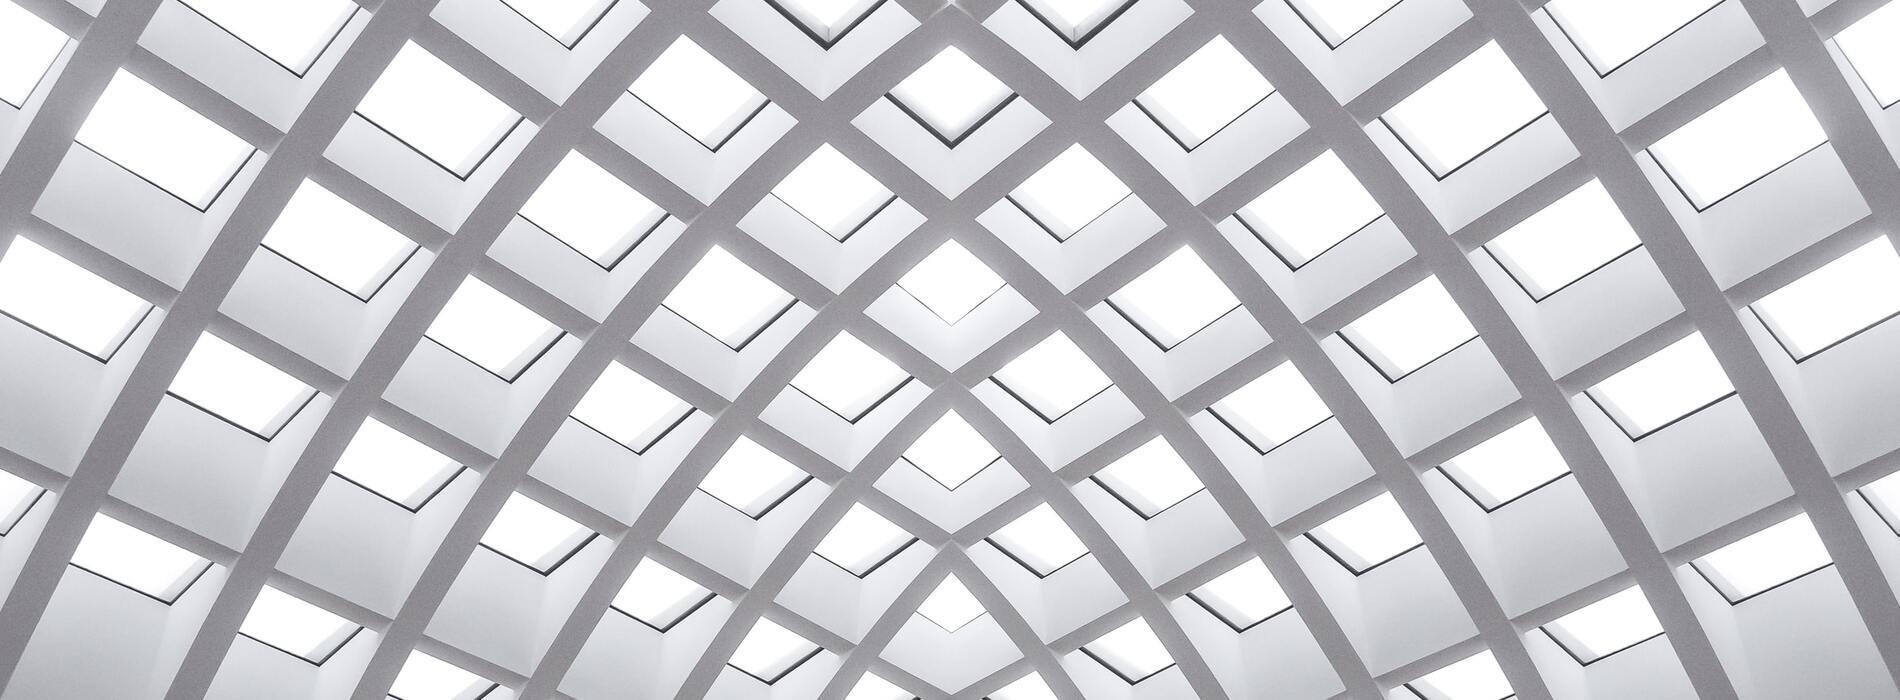 skylights architecture ceiling